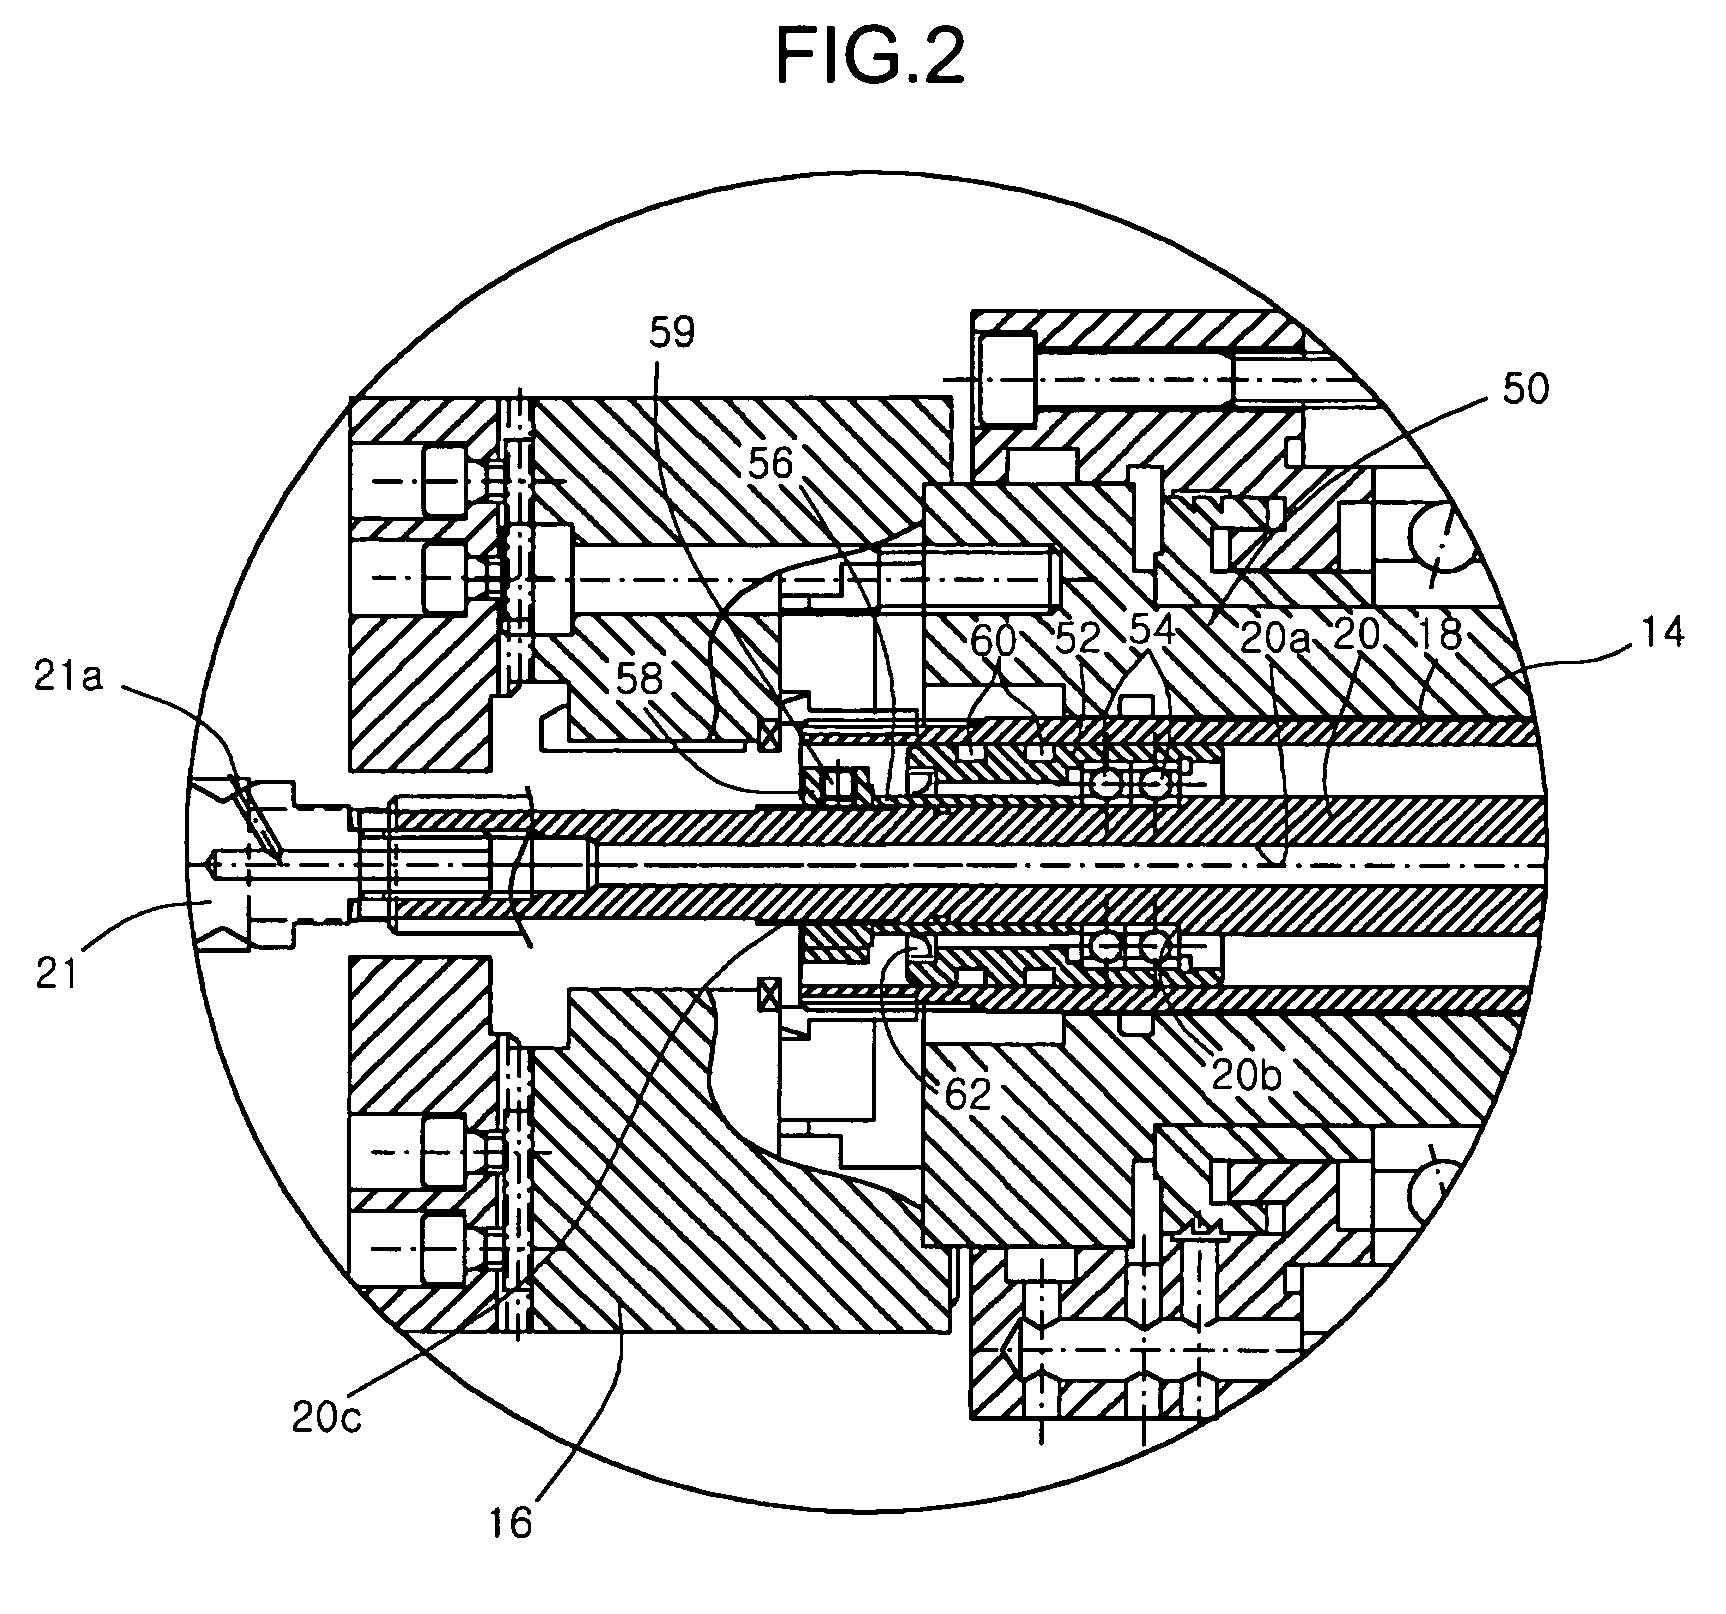 Workpiece ejecting device for a machine tool